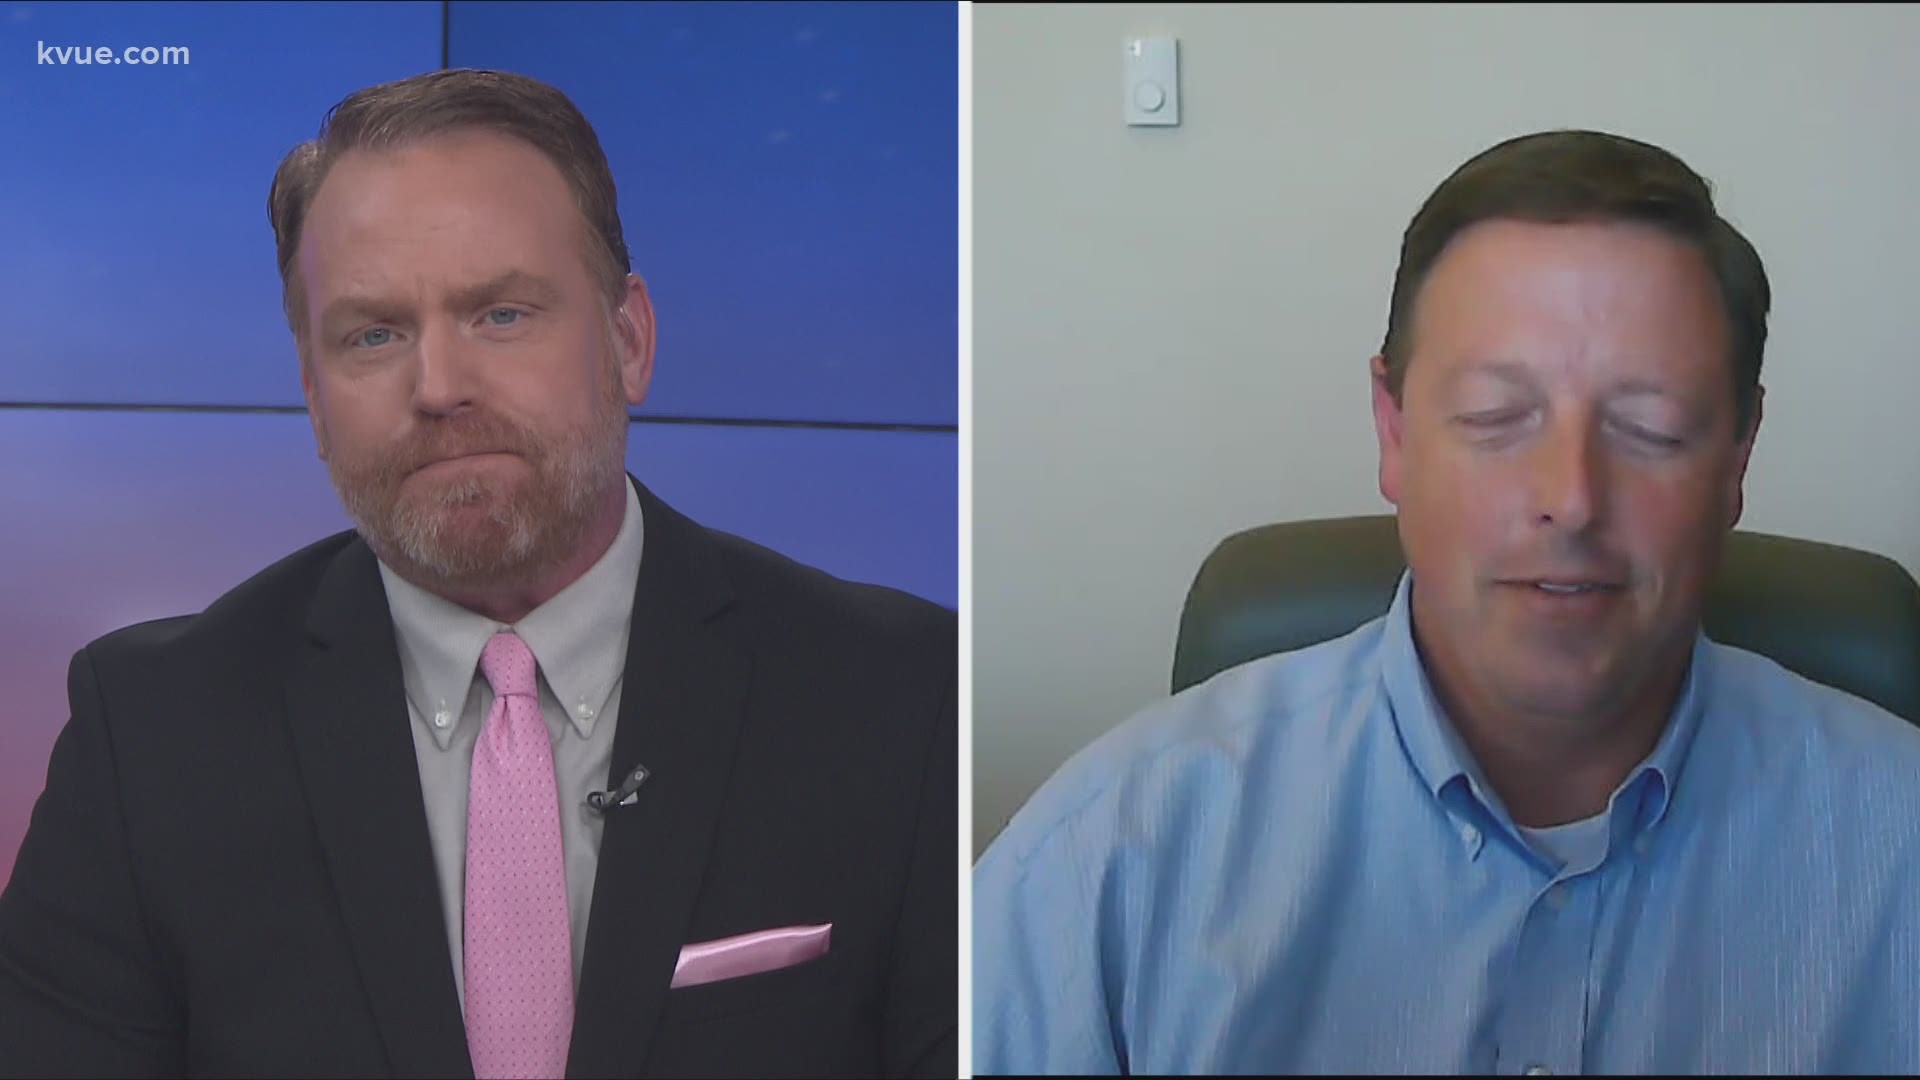 Lake Travis is planning to extend virtual learning until Sept. 21. Superintendent Paul Norton joined KVUE to discuss the district's decision.